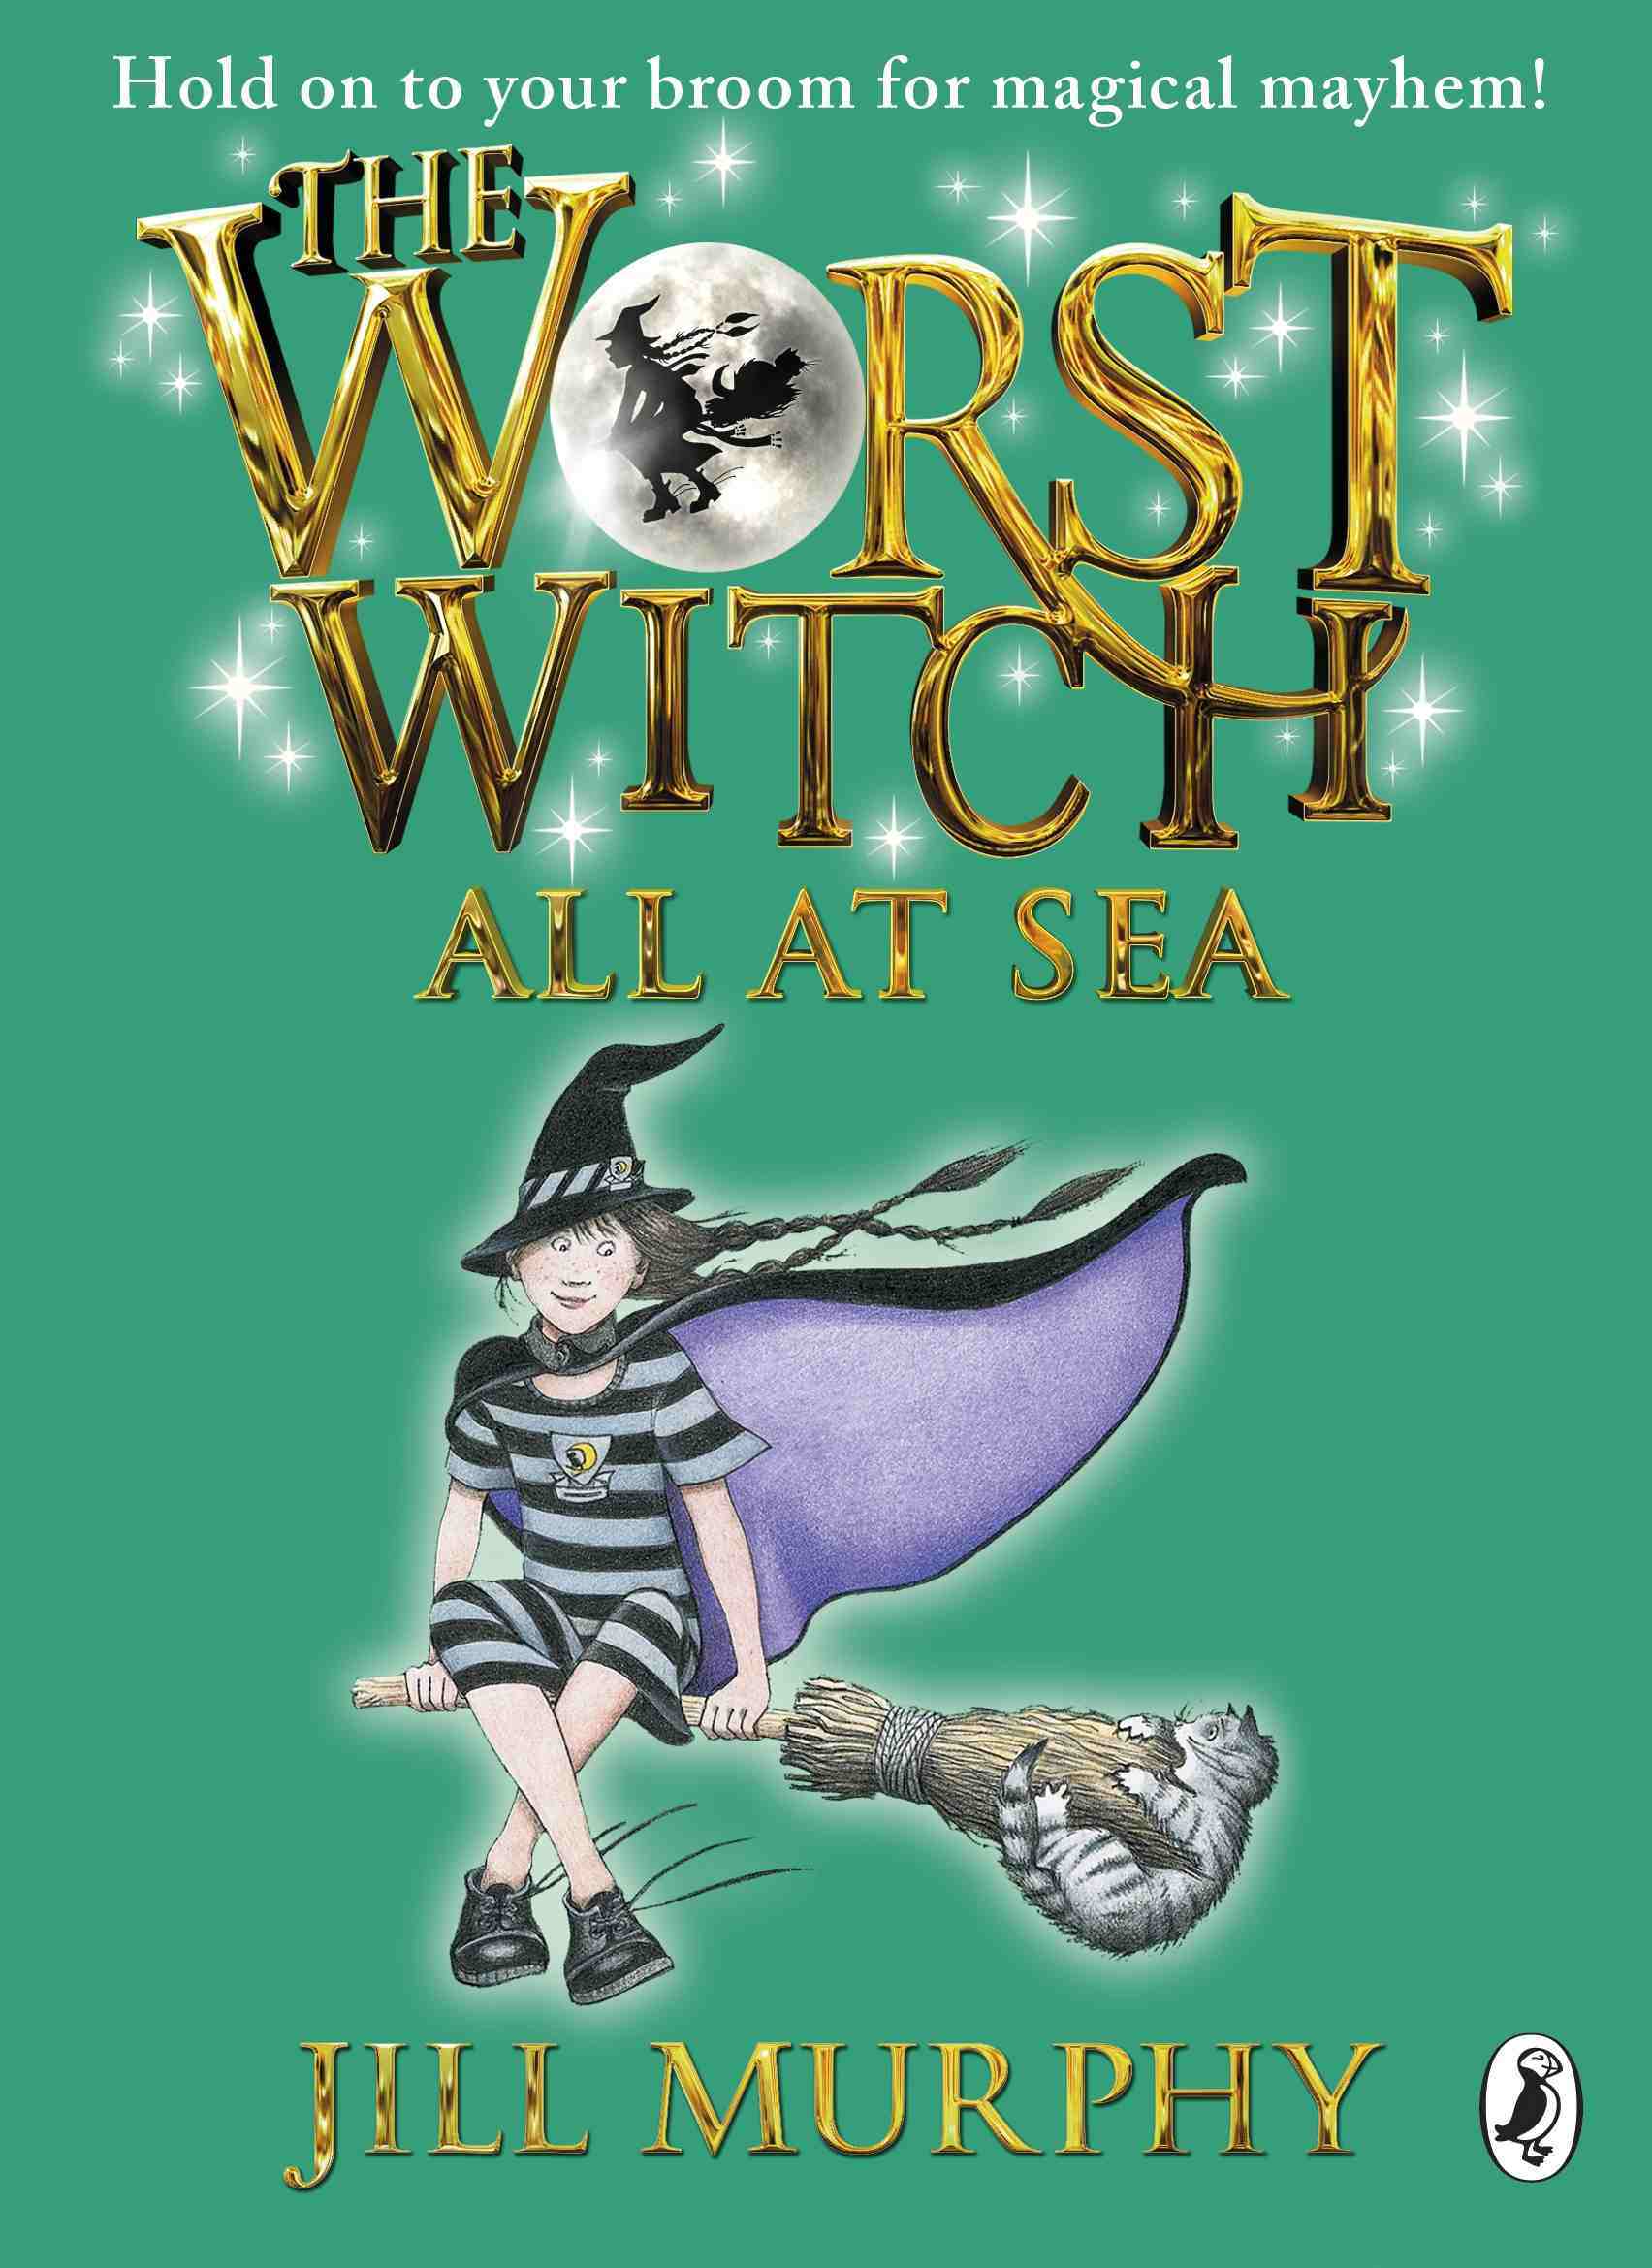 author of the worst witch